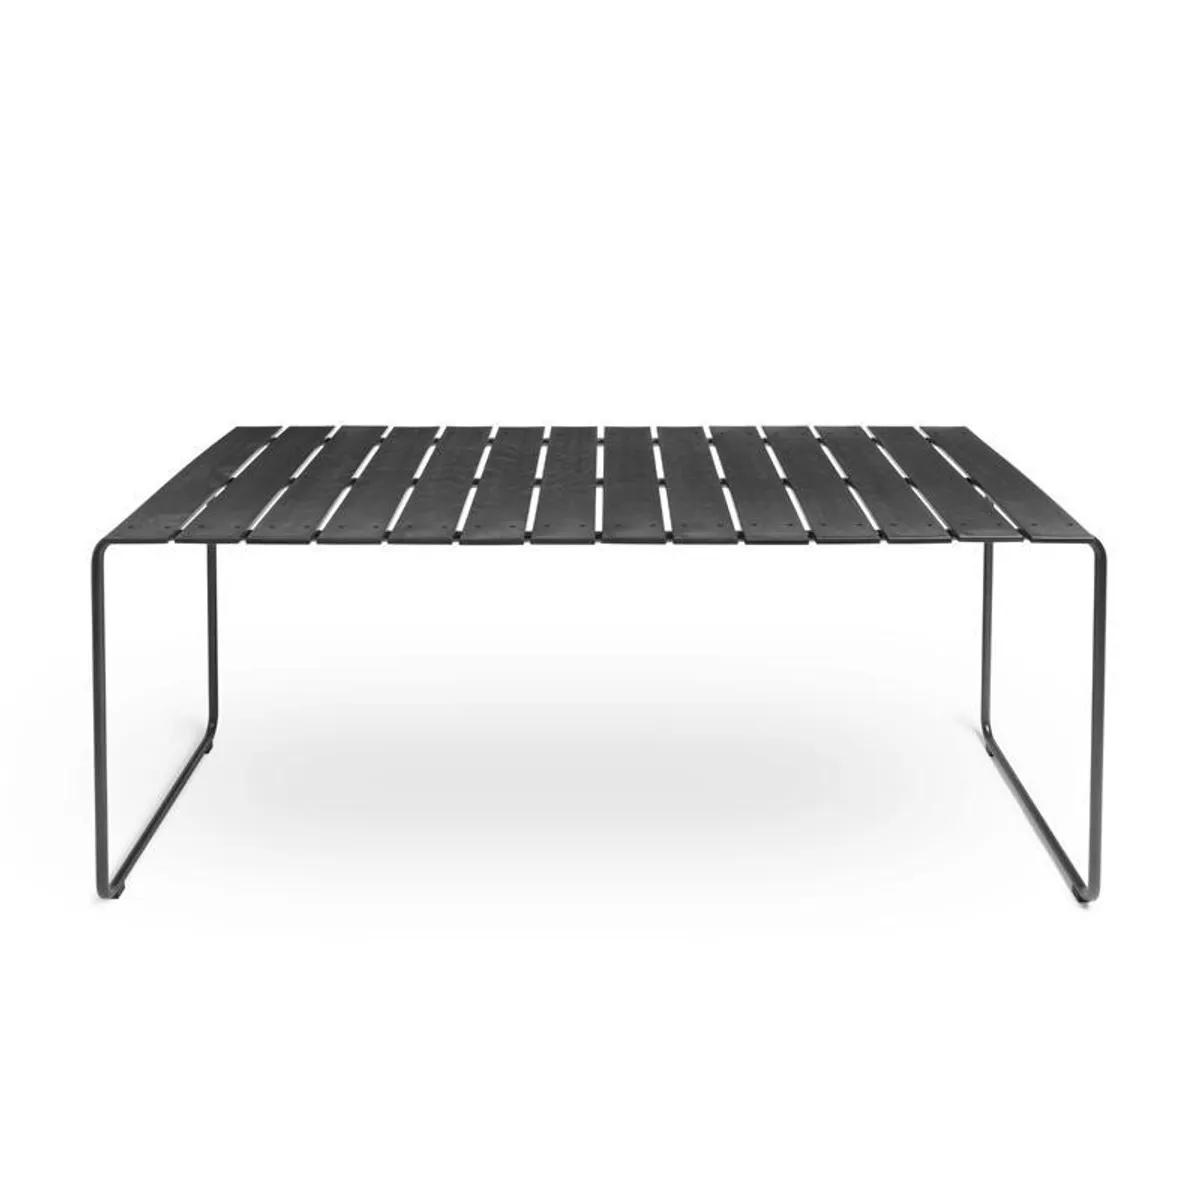 Ocean Table Recycled Plastic Waste With Metal Sled Legs Outdoor 4 Person Dining Table In Black 003 Inside Out Contracts